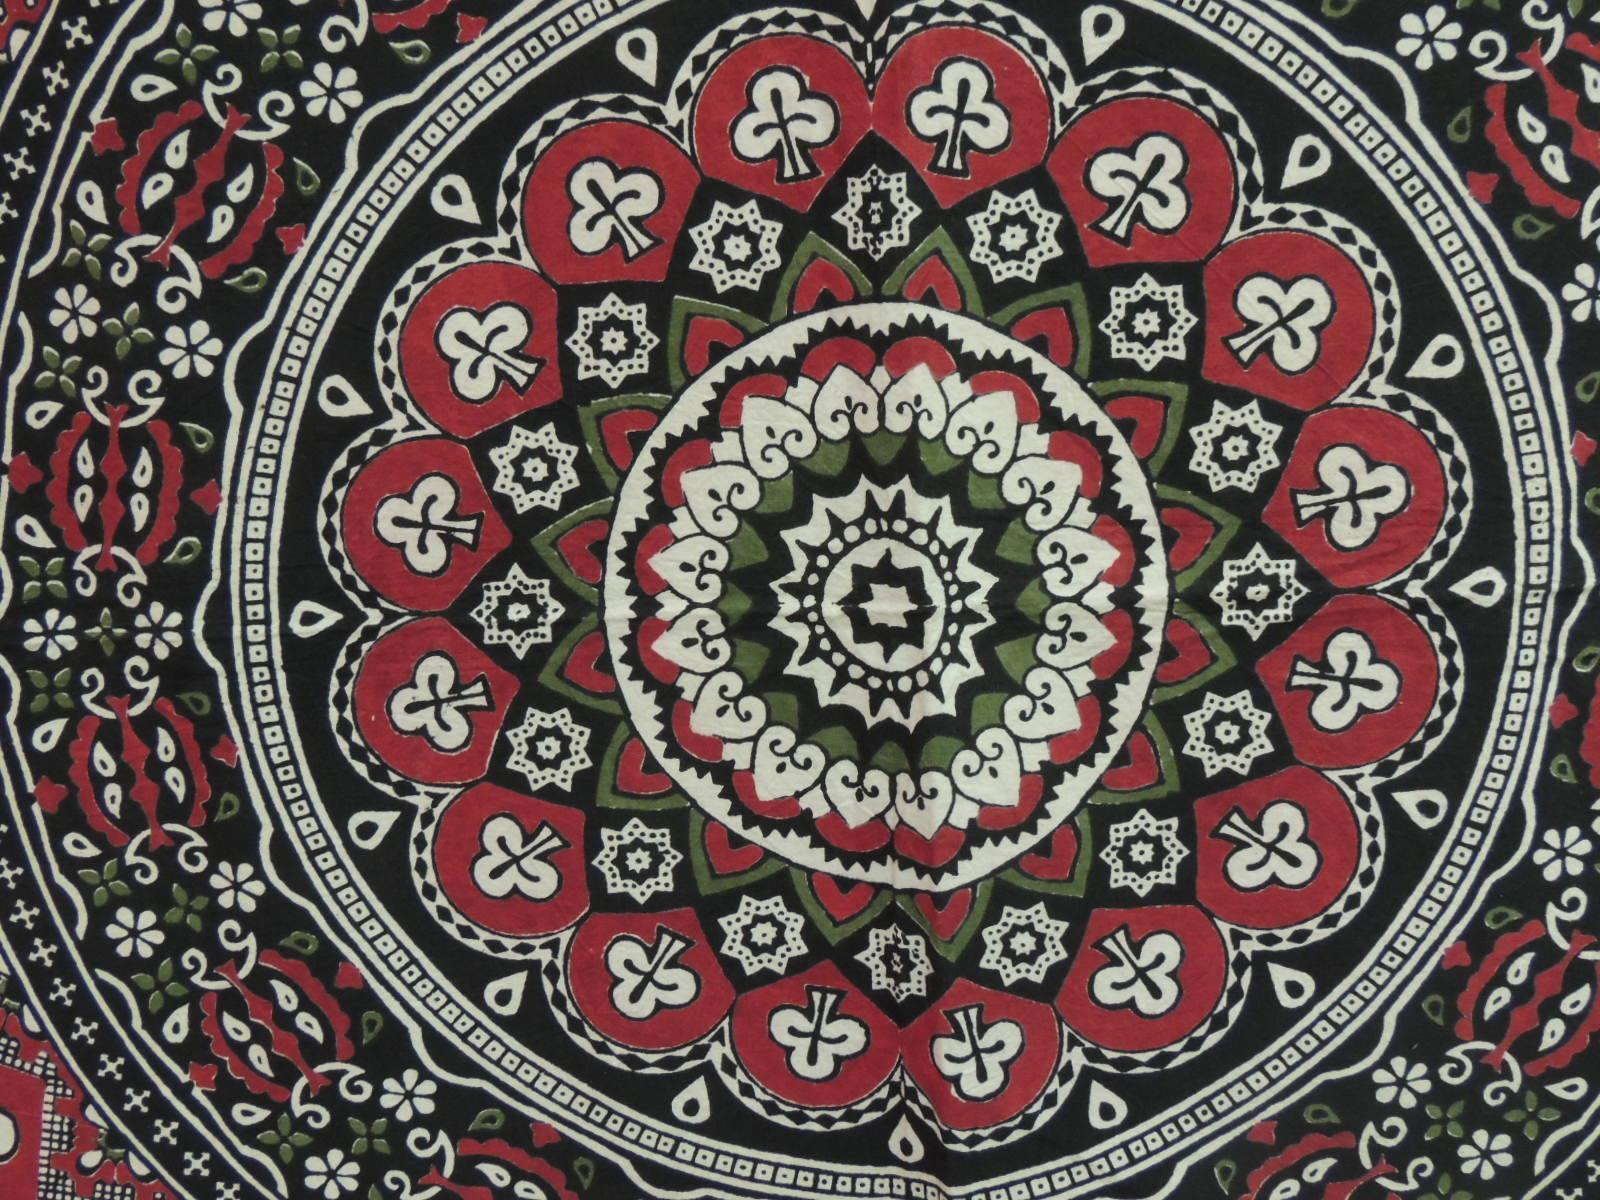 Tribal Large Indian Red and Black Hand-Blocked Printed on Cotton Cloth/Bed Cover For Sale